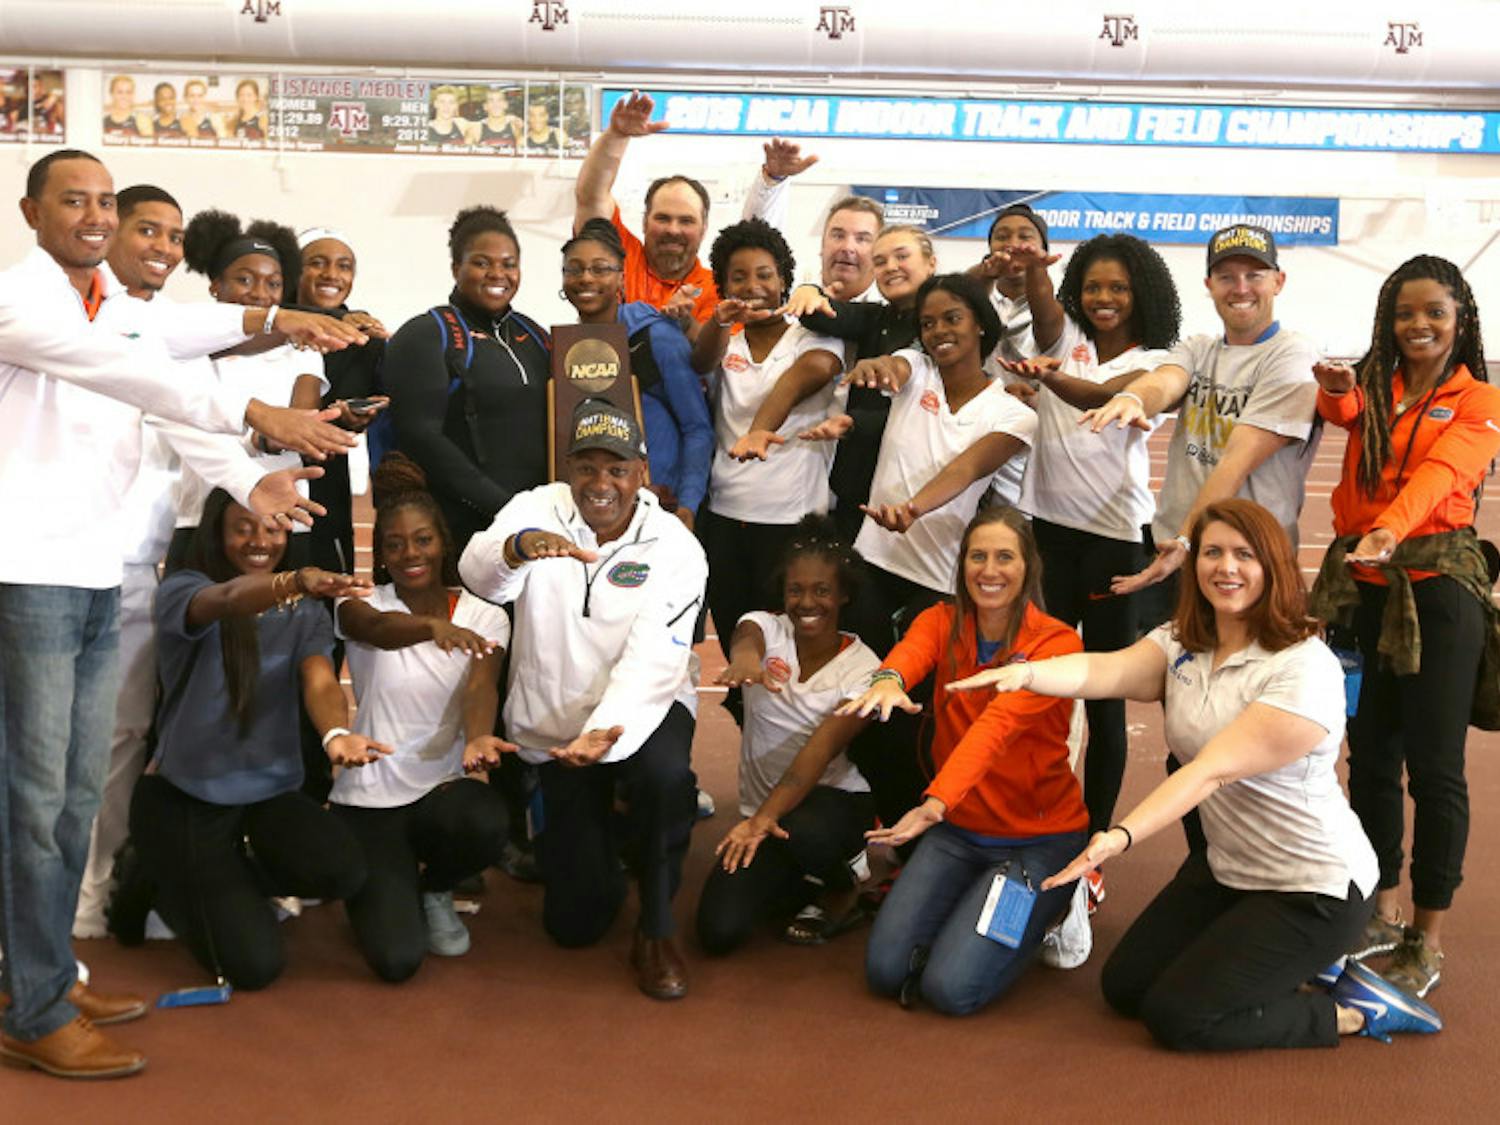 The UF men's and women's track and field teams both took first and fourth, respectively, at the NCAA Indoor Championships in Fayetteville, Arkansas.